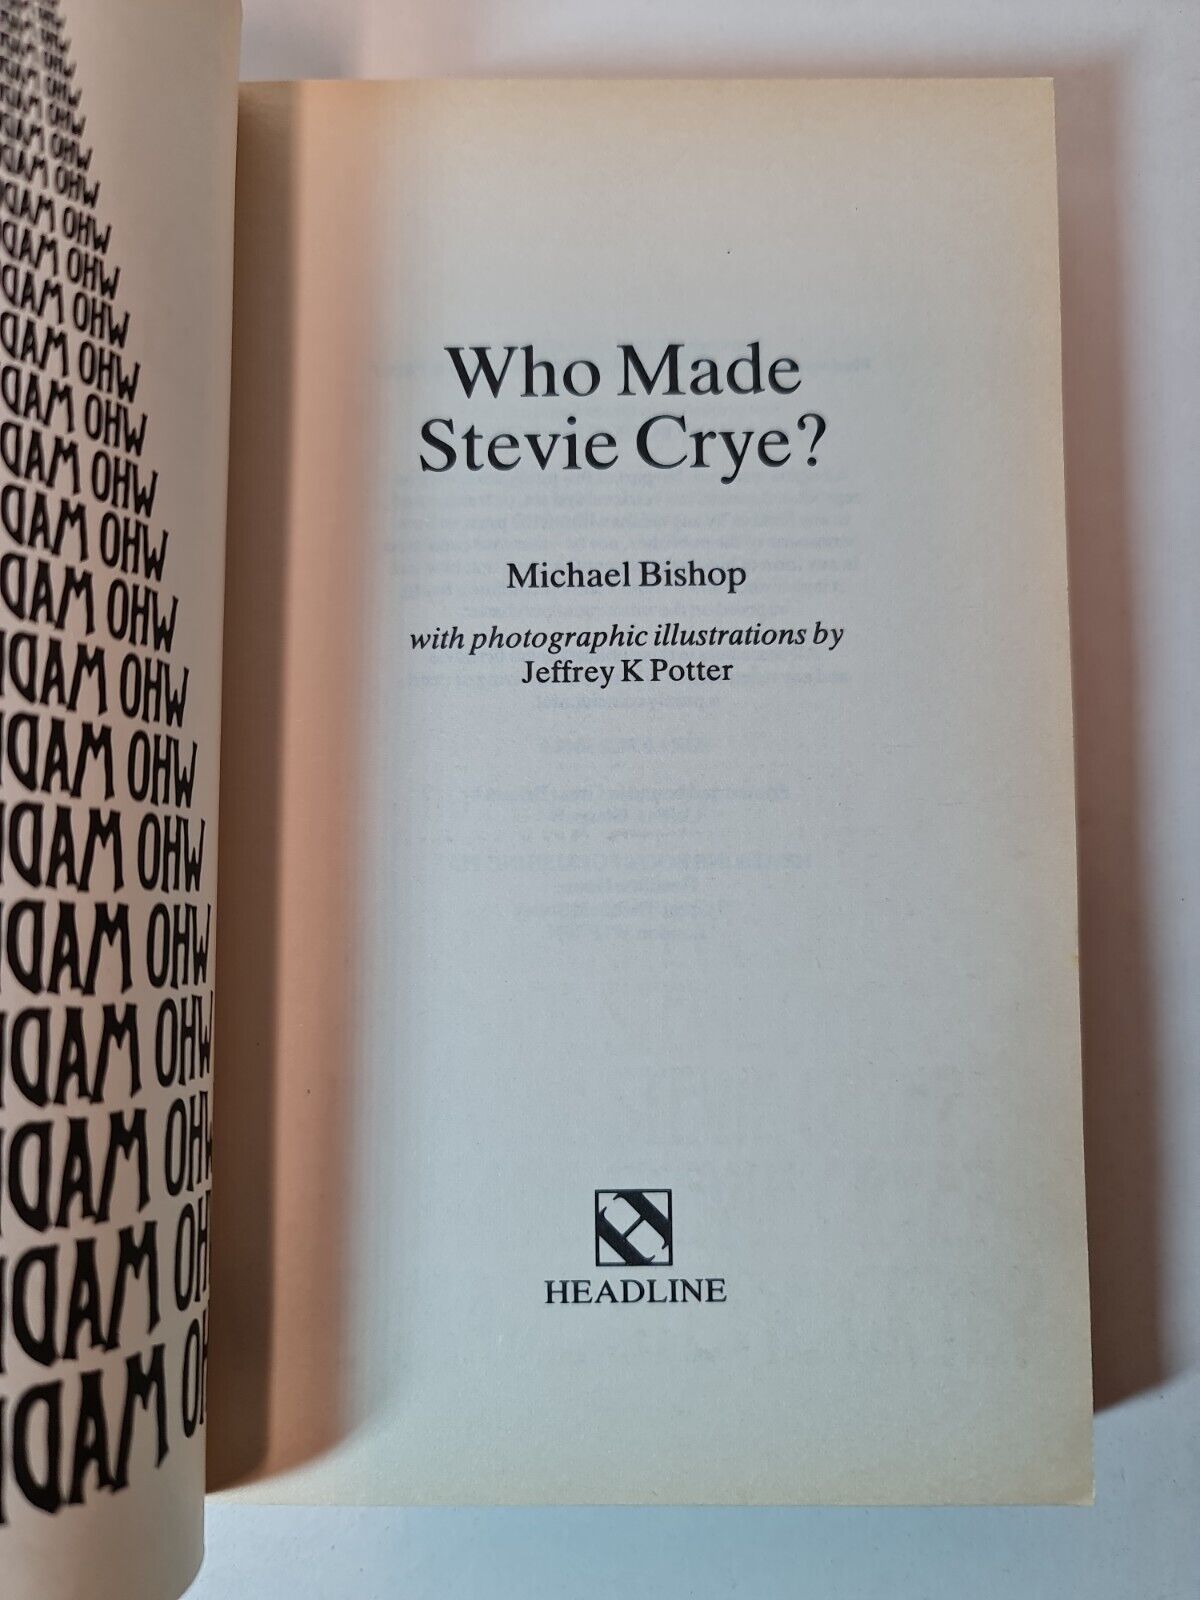 Who Made Stevie Crye? by Michael Bishop (1987)